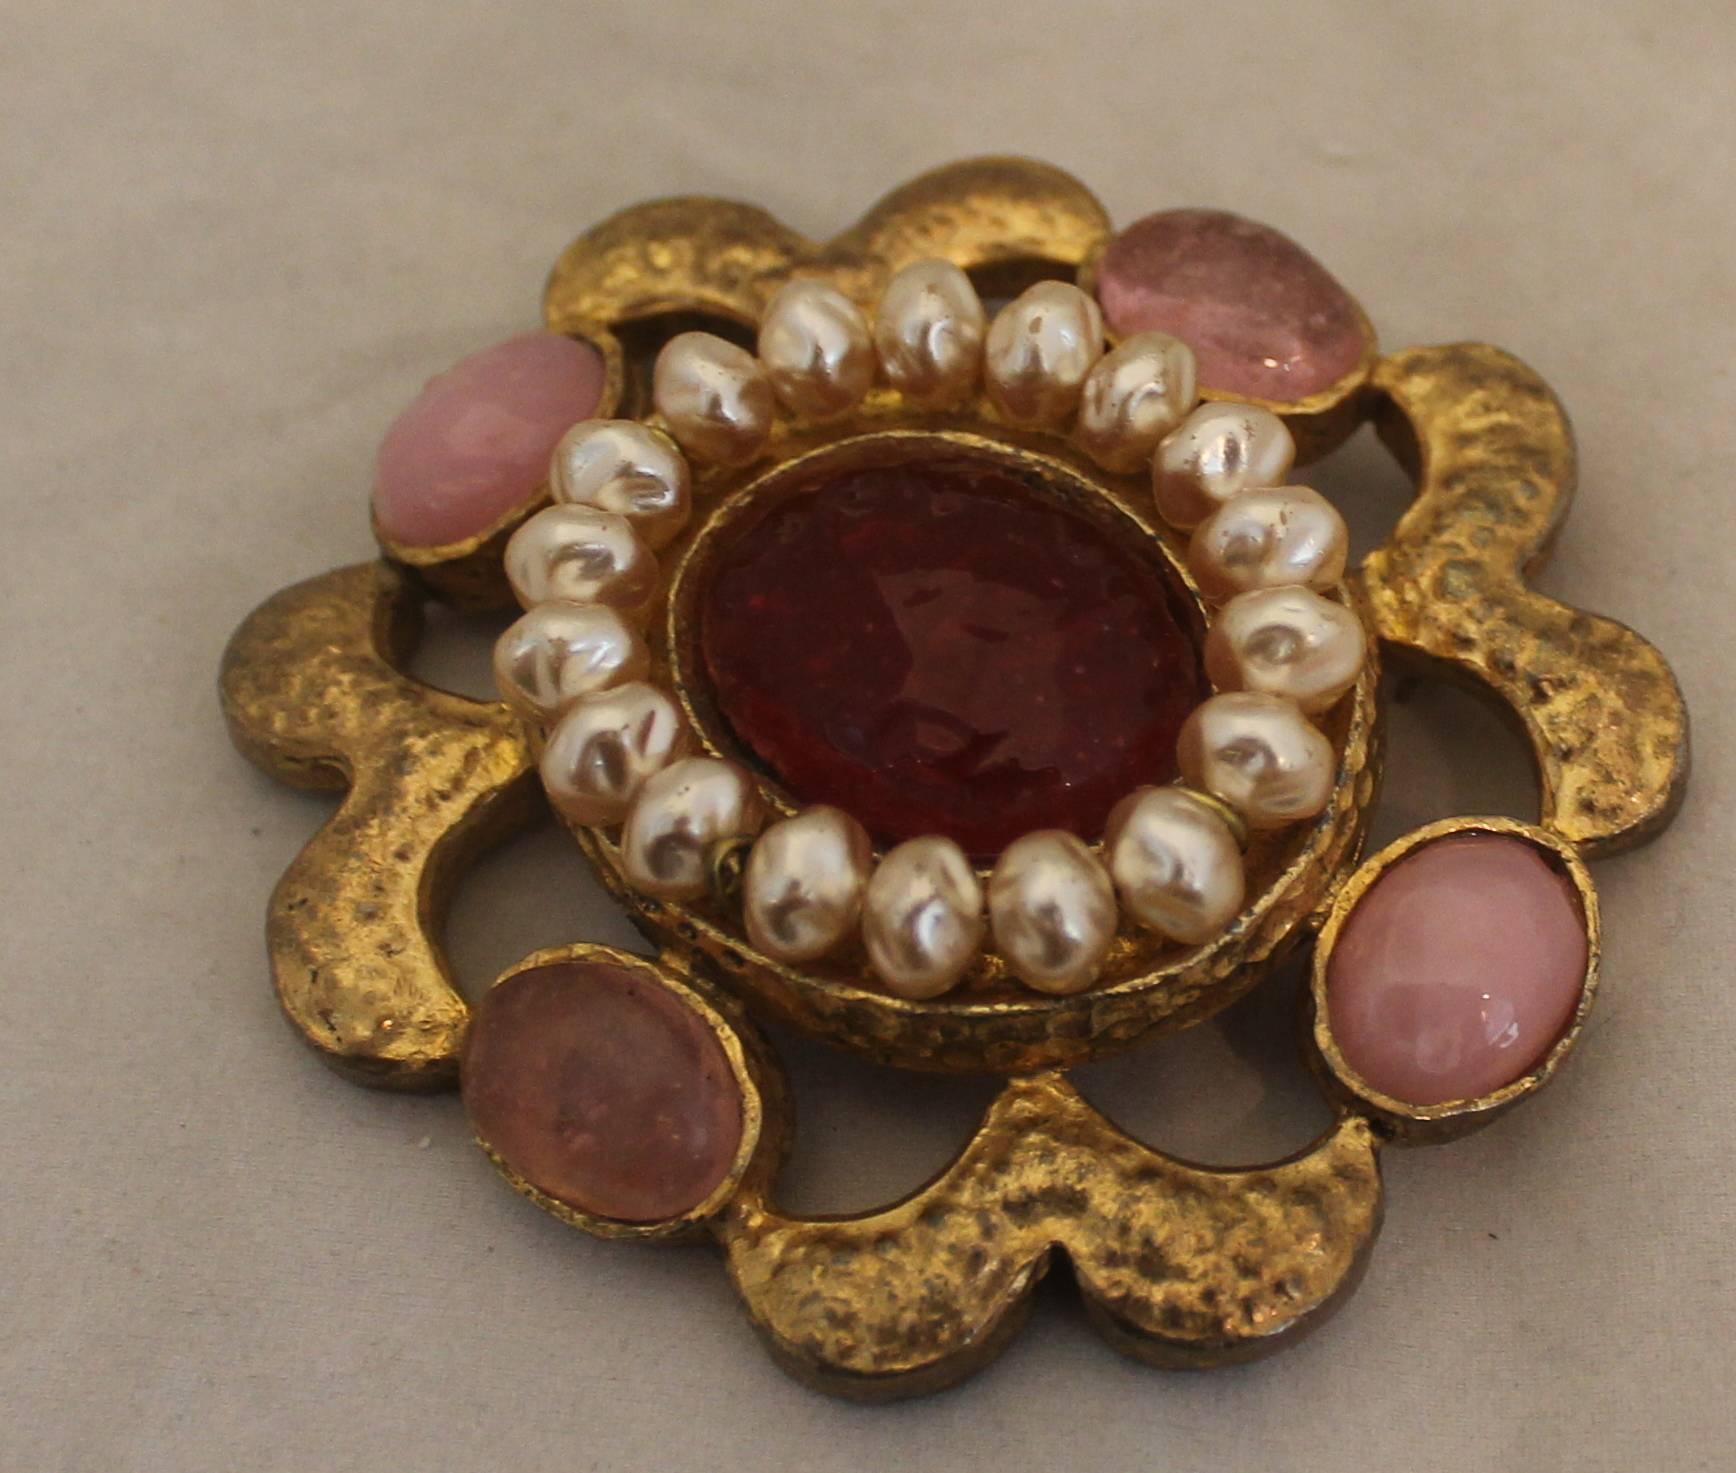 Chanel Vintage Gold Brooch & Pendant with Pink Gripoix & Pearl - circa 94P. This brooch is in excellent vintage condition and has an ornate look. The gripoix stones are a lighter and darker pink and the goldtone material is hammered. The pearl trim